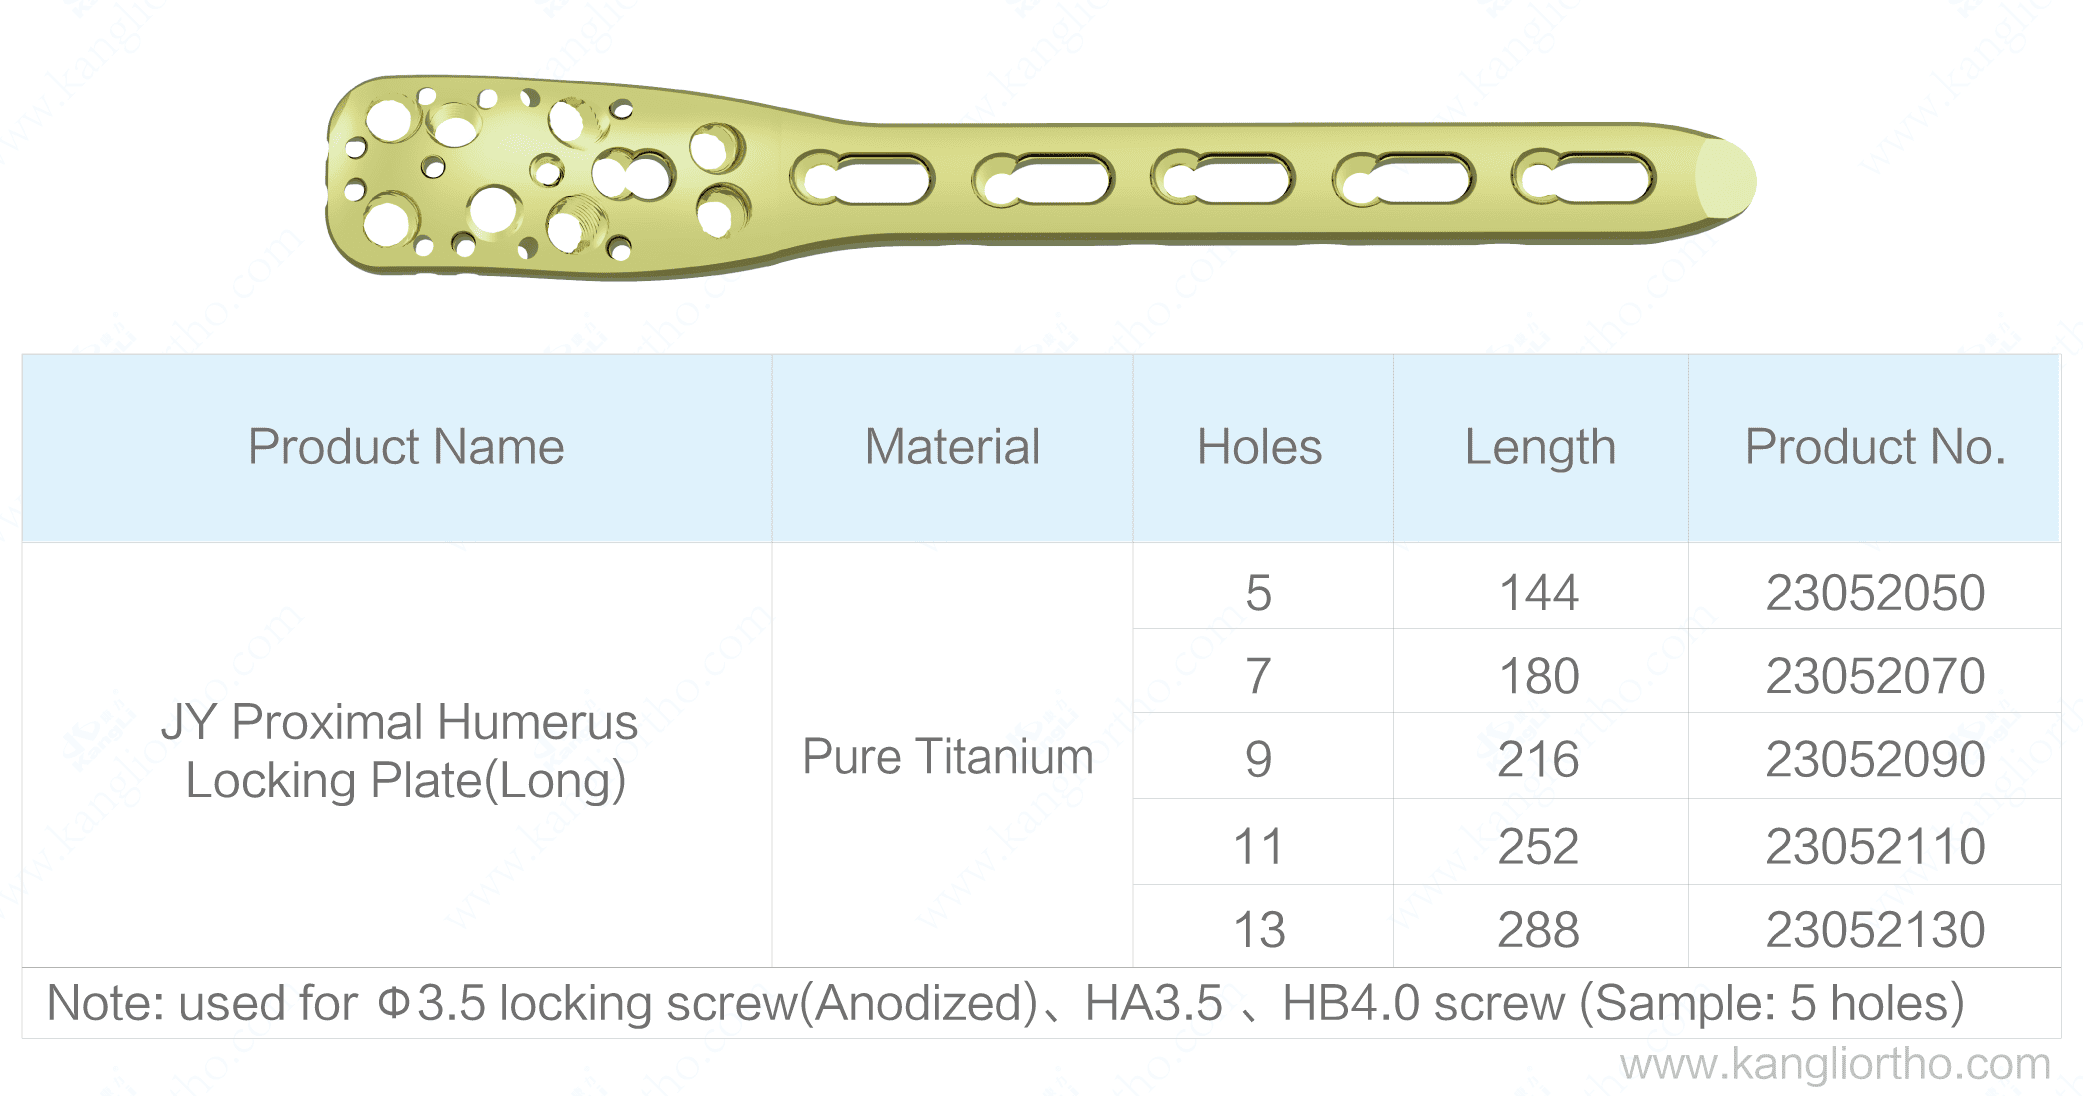 jy-proximal-humerus-locking-plate-long-specifications